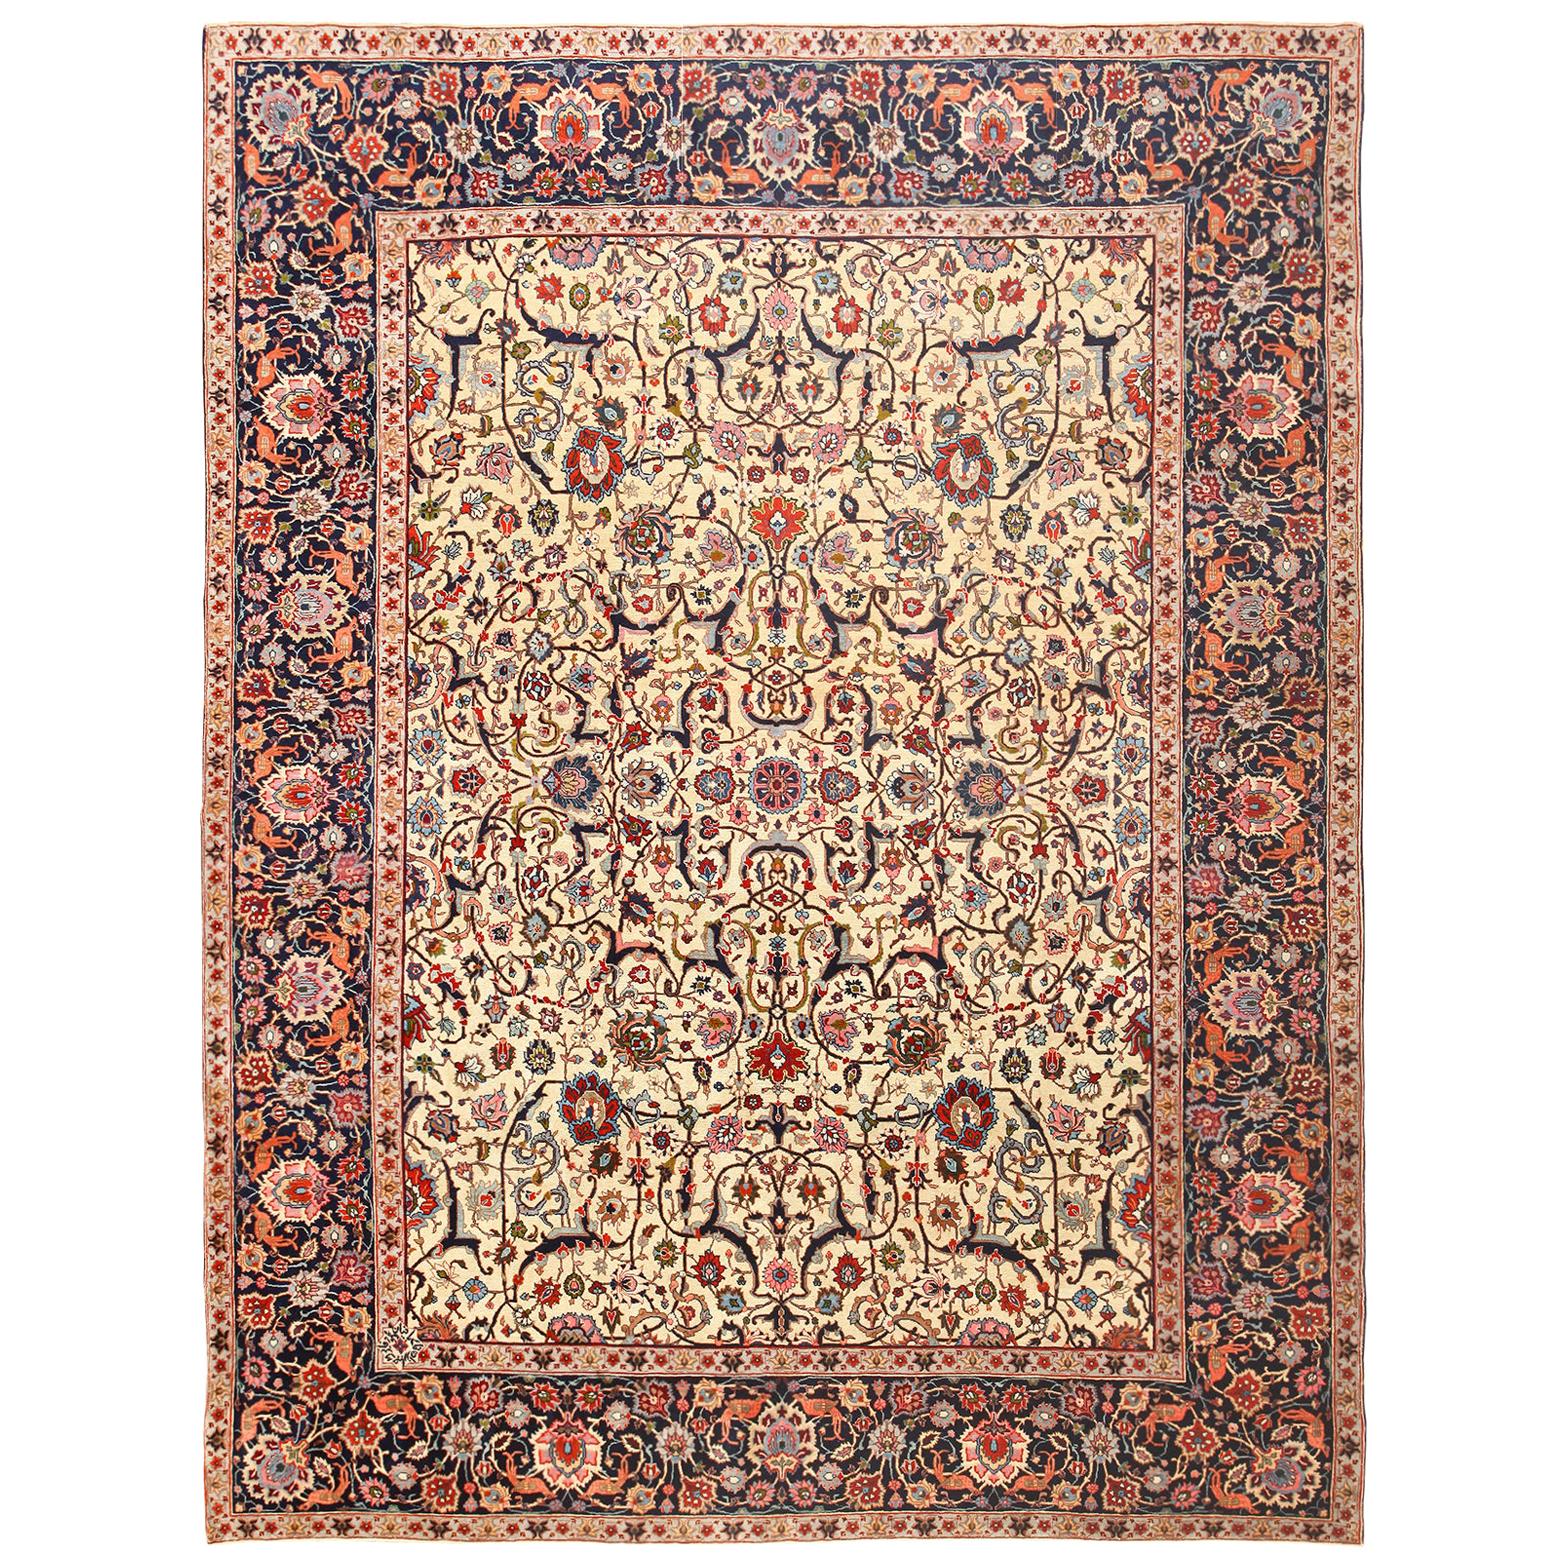 Nazmiyal Collection Antique Persian Tabriz Rug. Size: 9 ft 4 in x 12 ft 6 in